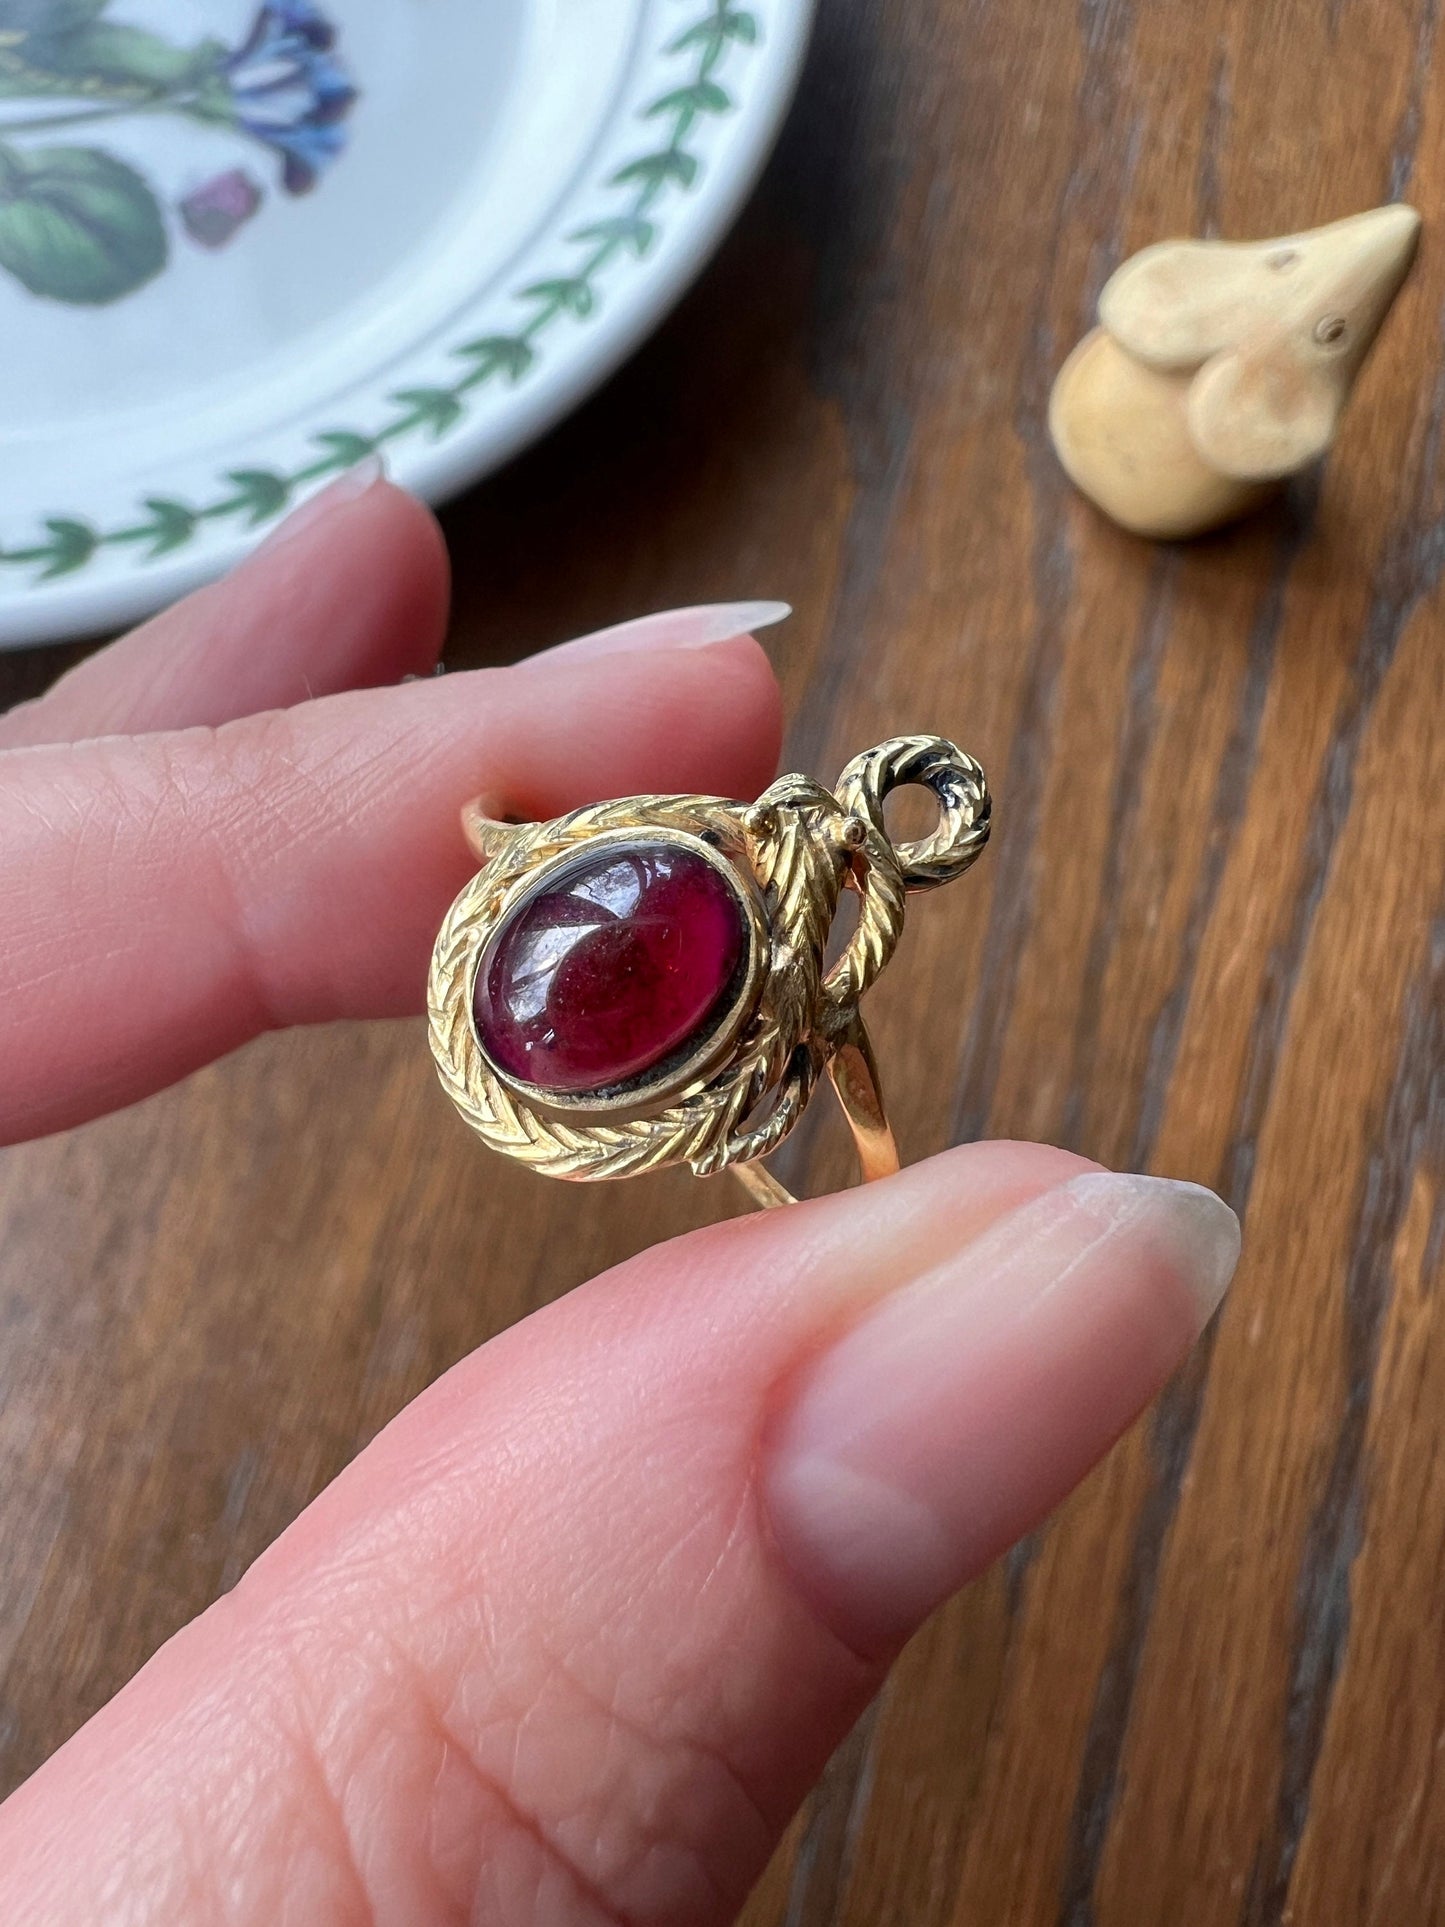 SNAKE Coiled Cabochon GARNET Ring 14k Figural 18k Gold Shank Juicy Glow Purple Victorian Stacker Eternal Love Romantic Gift Engraved Scales